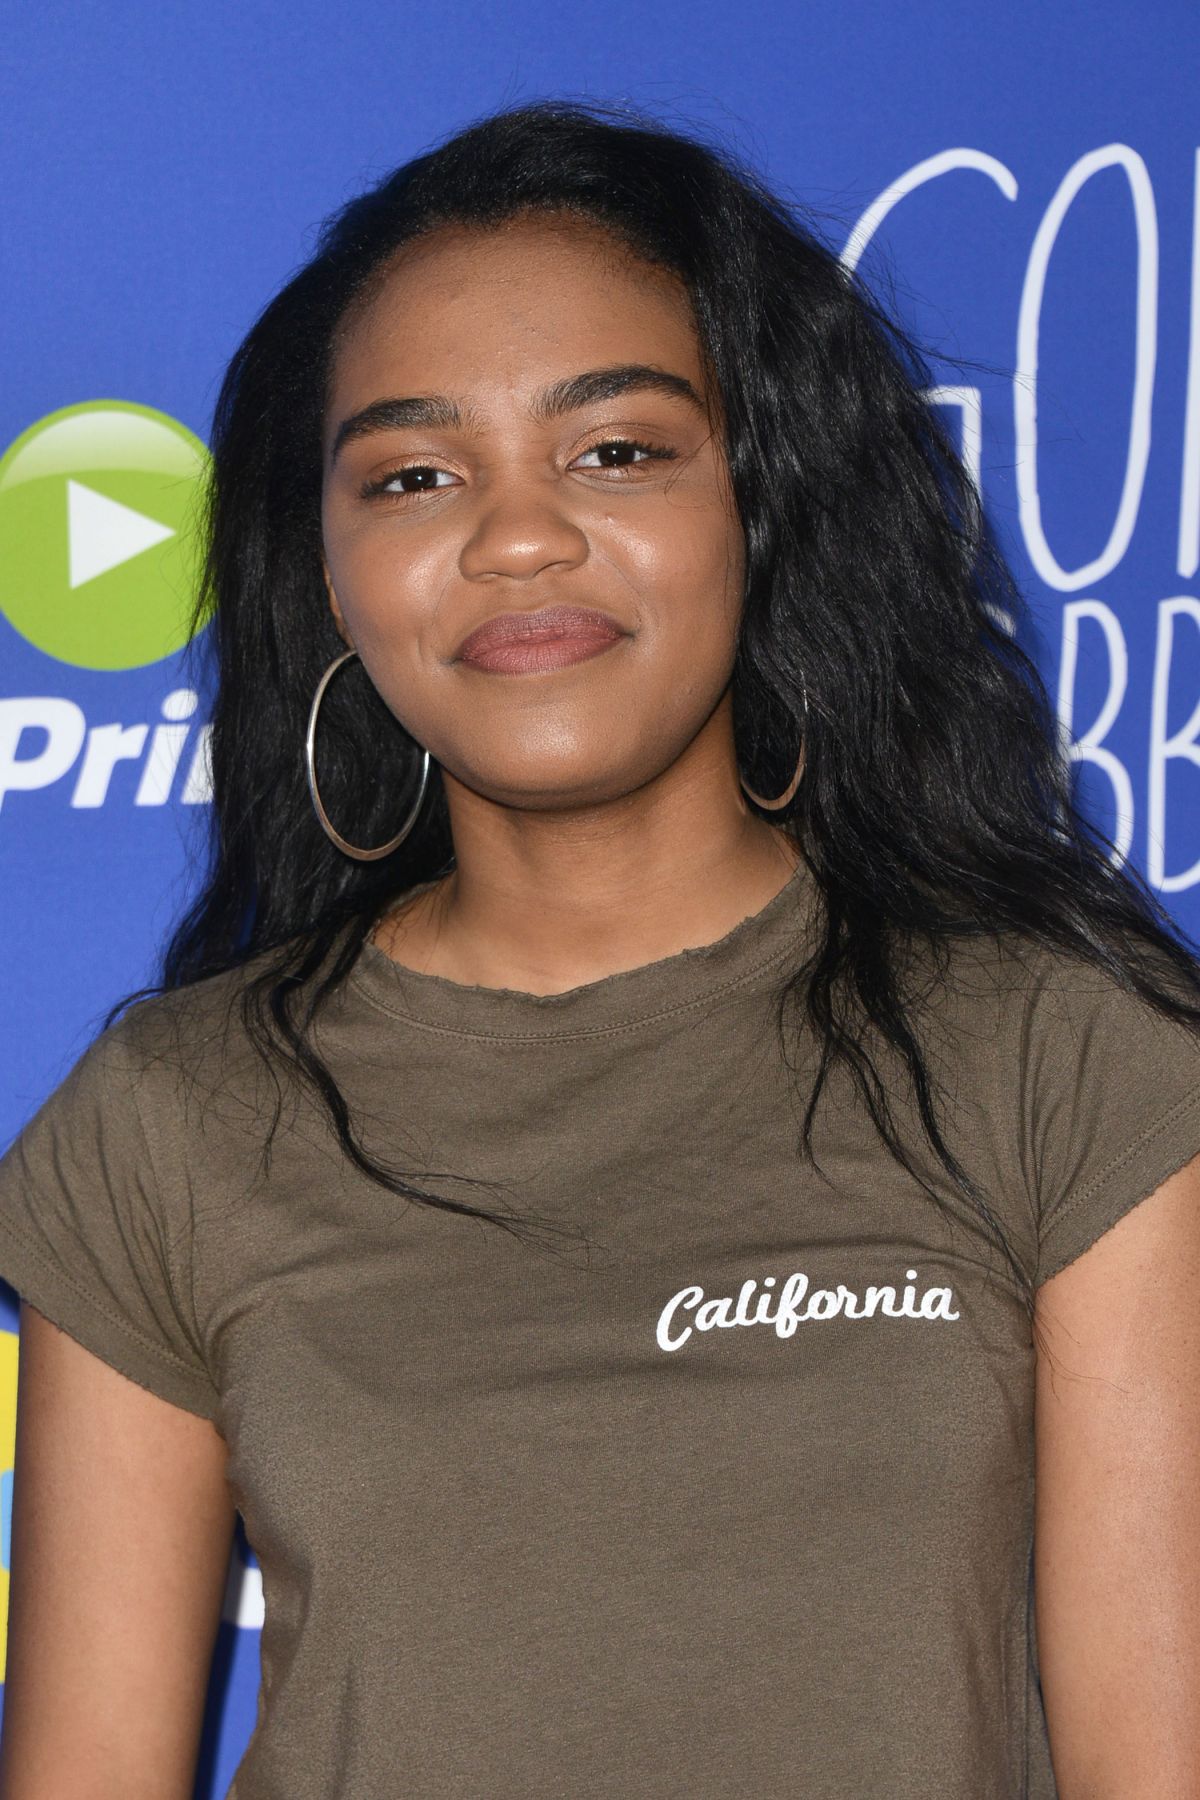 CHINA ANNE MCCLAIN at Just Jared Fall Fun Day in Los Angeles 10/24/2015.